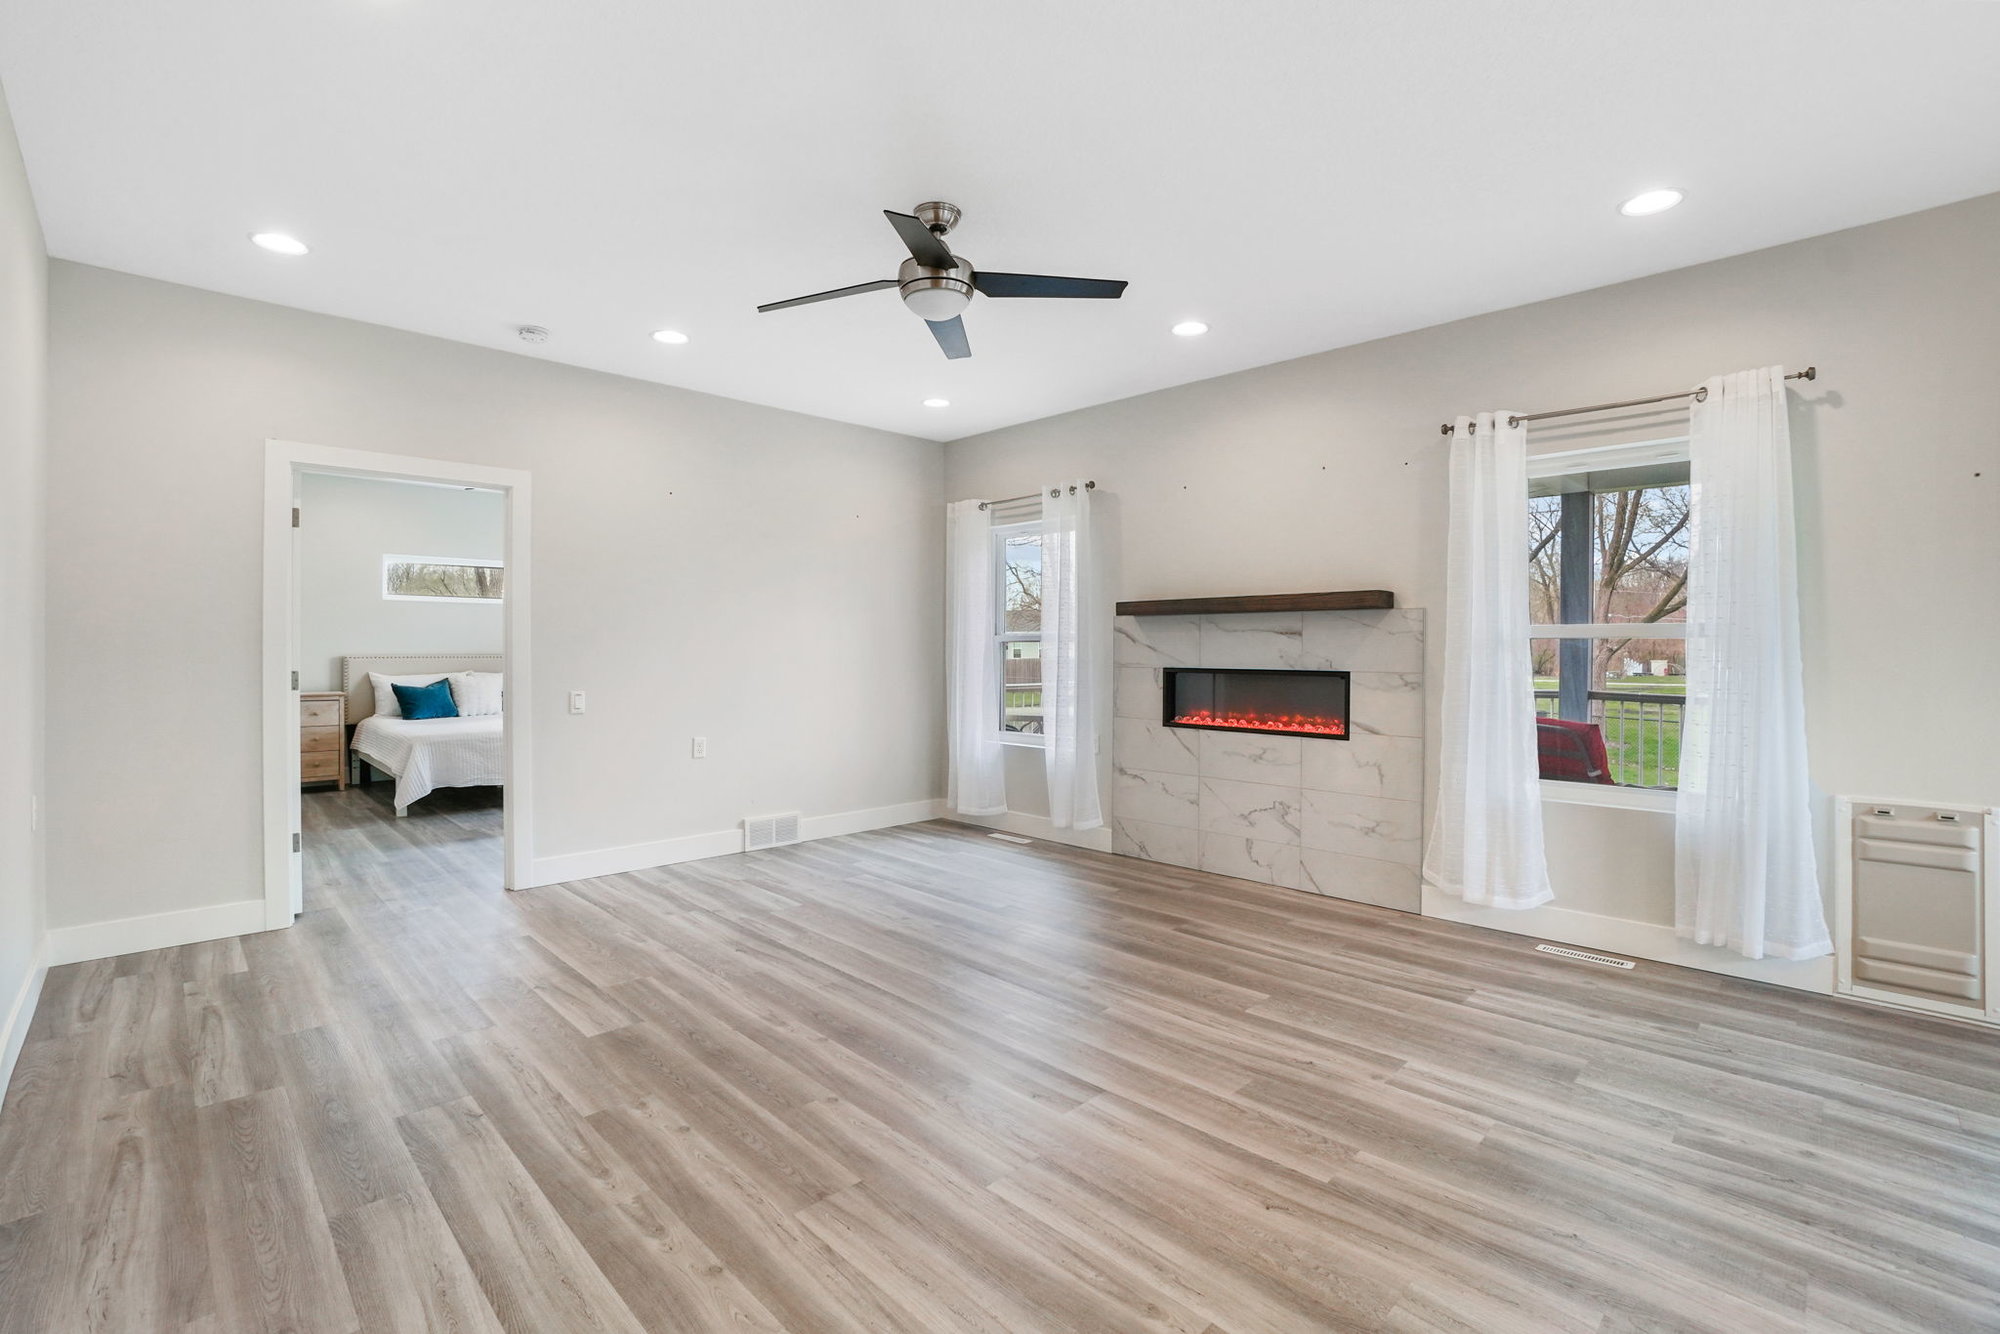 The Newly- Built Home in Evansdale Iowa that is Sure to Impress